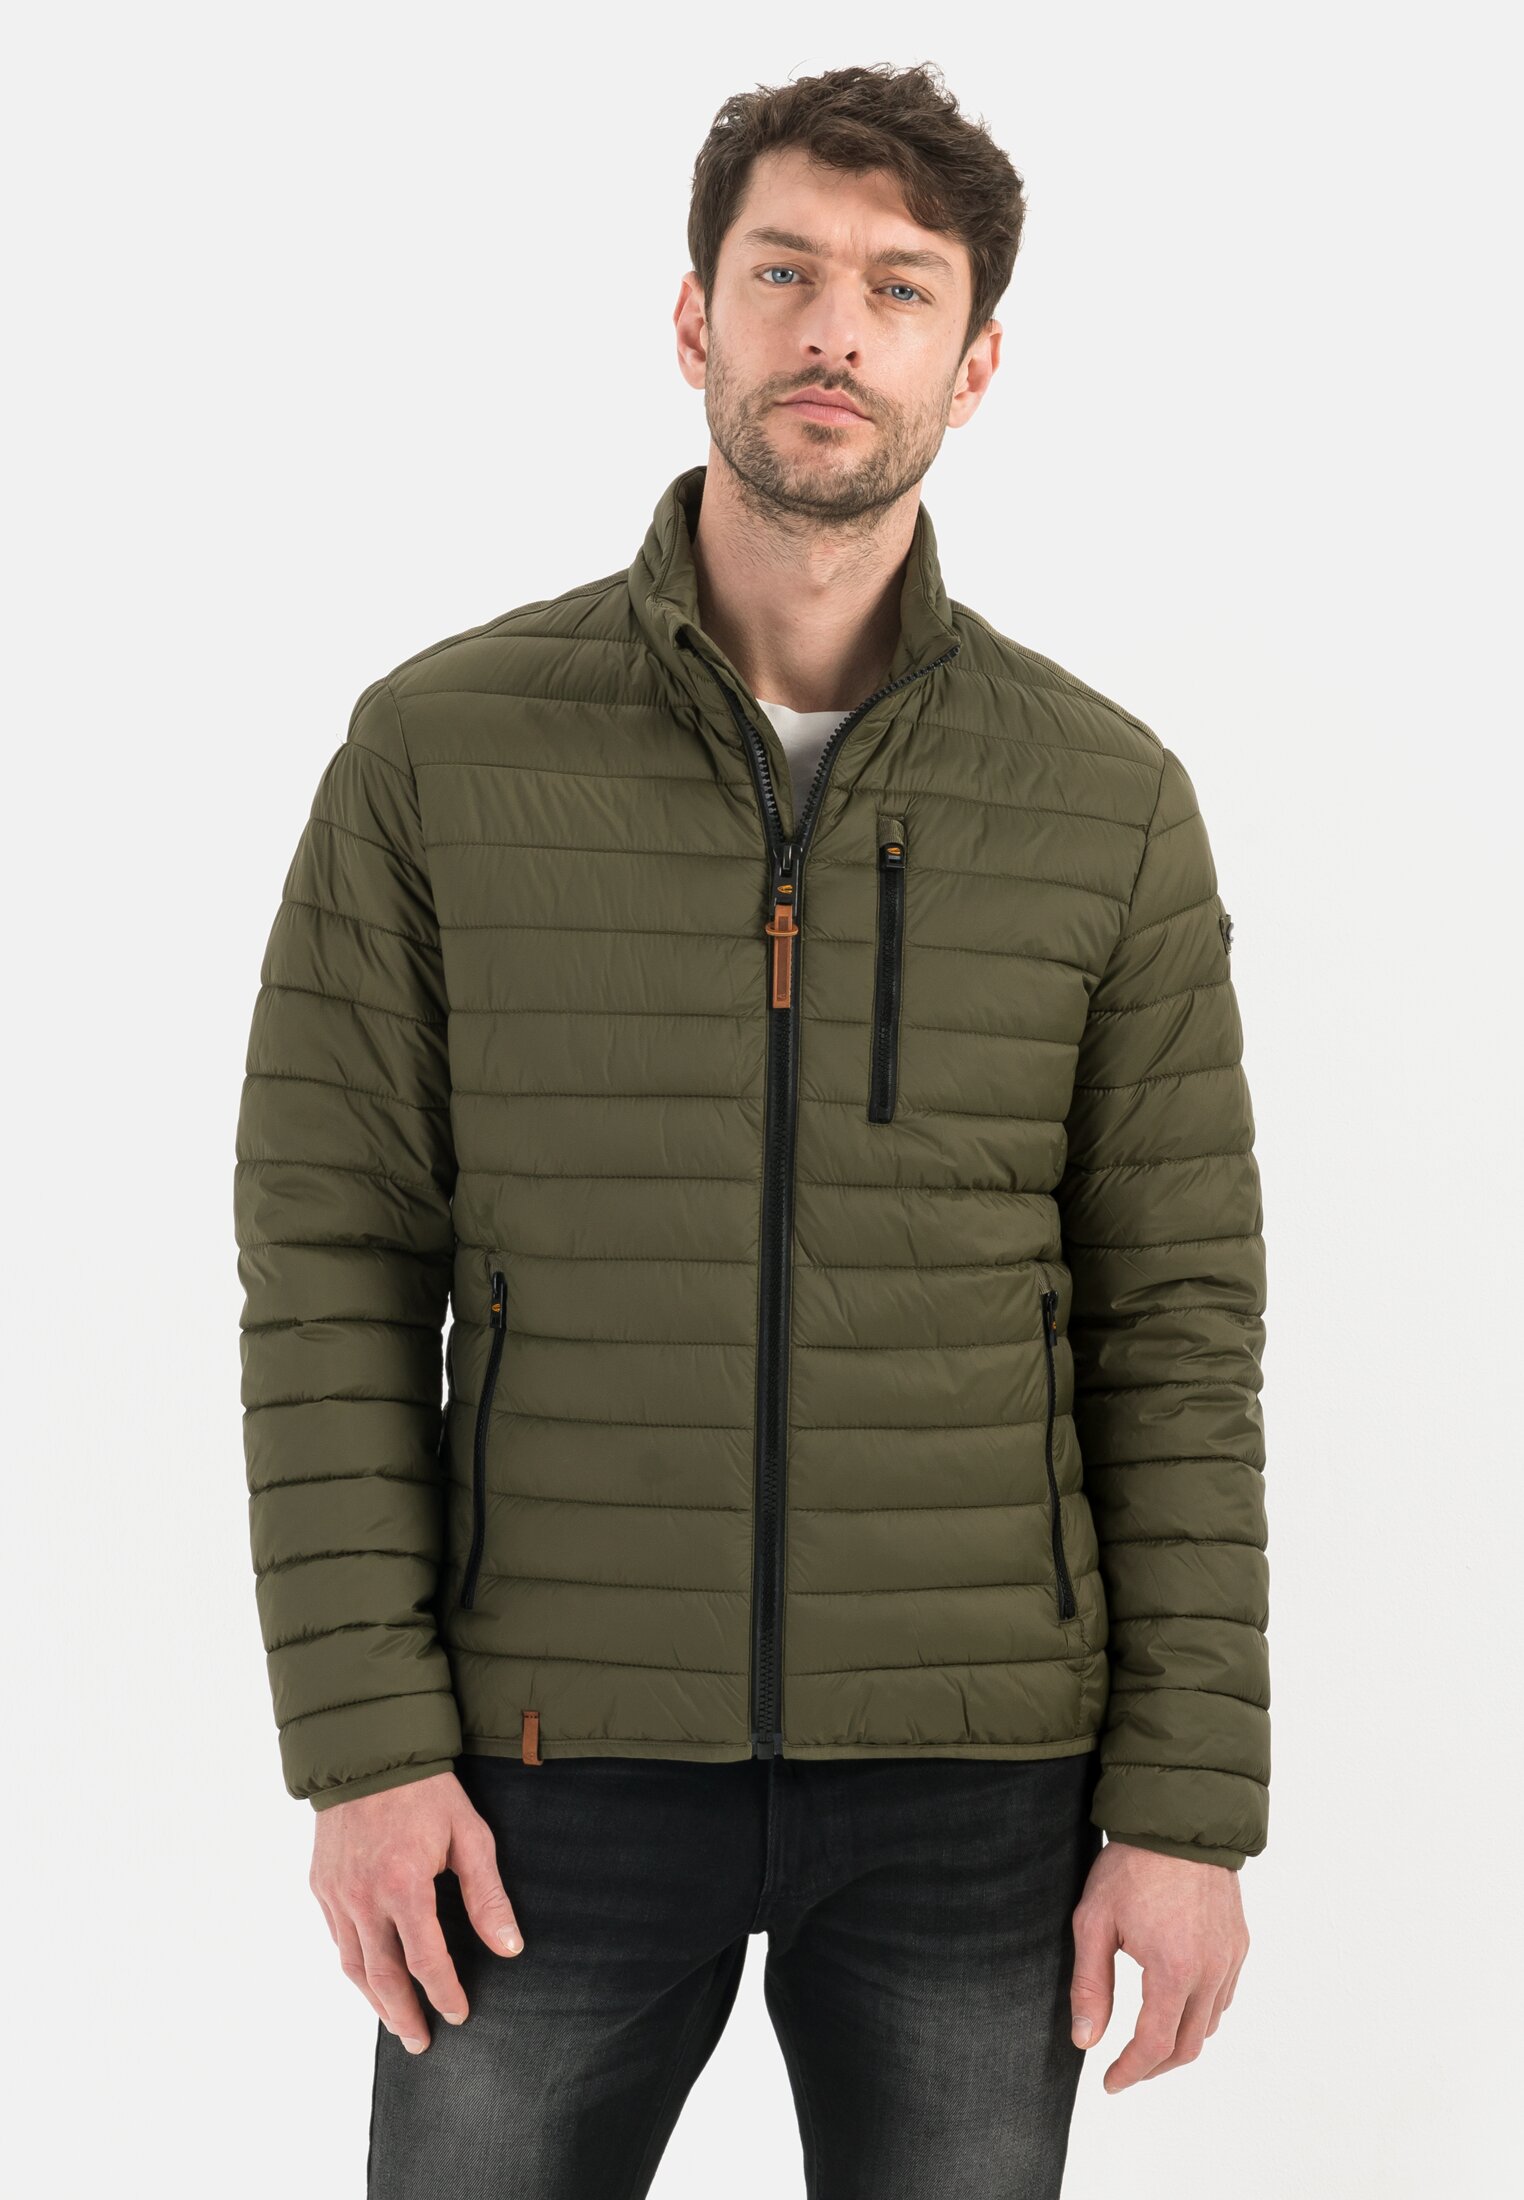 Camel Active Downfree quilted jacket from recycled polyester